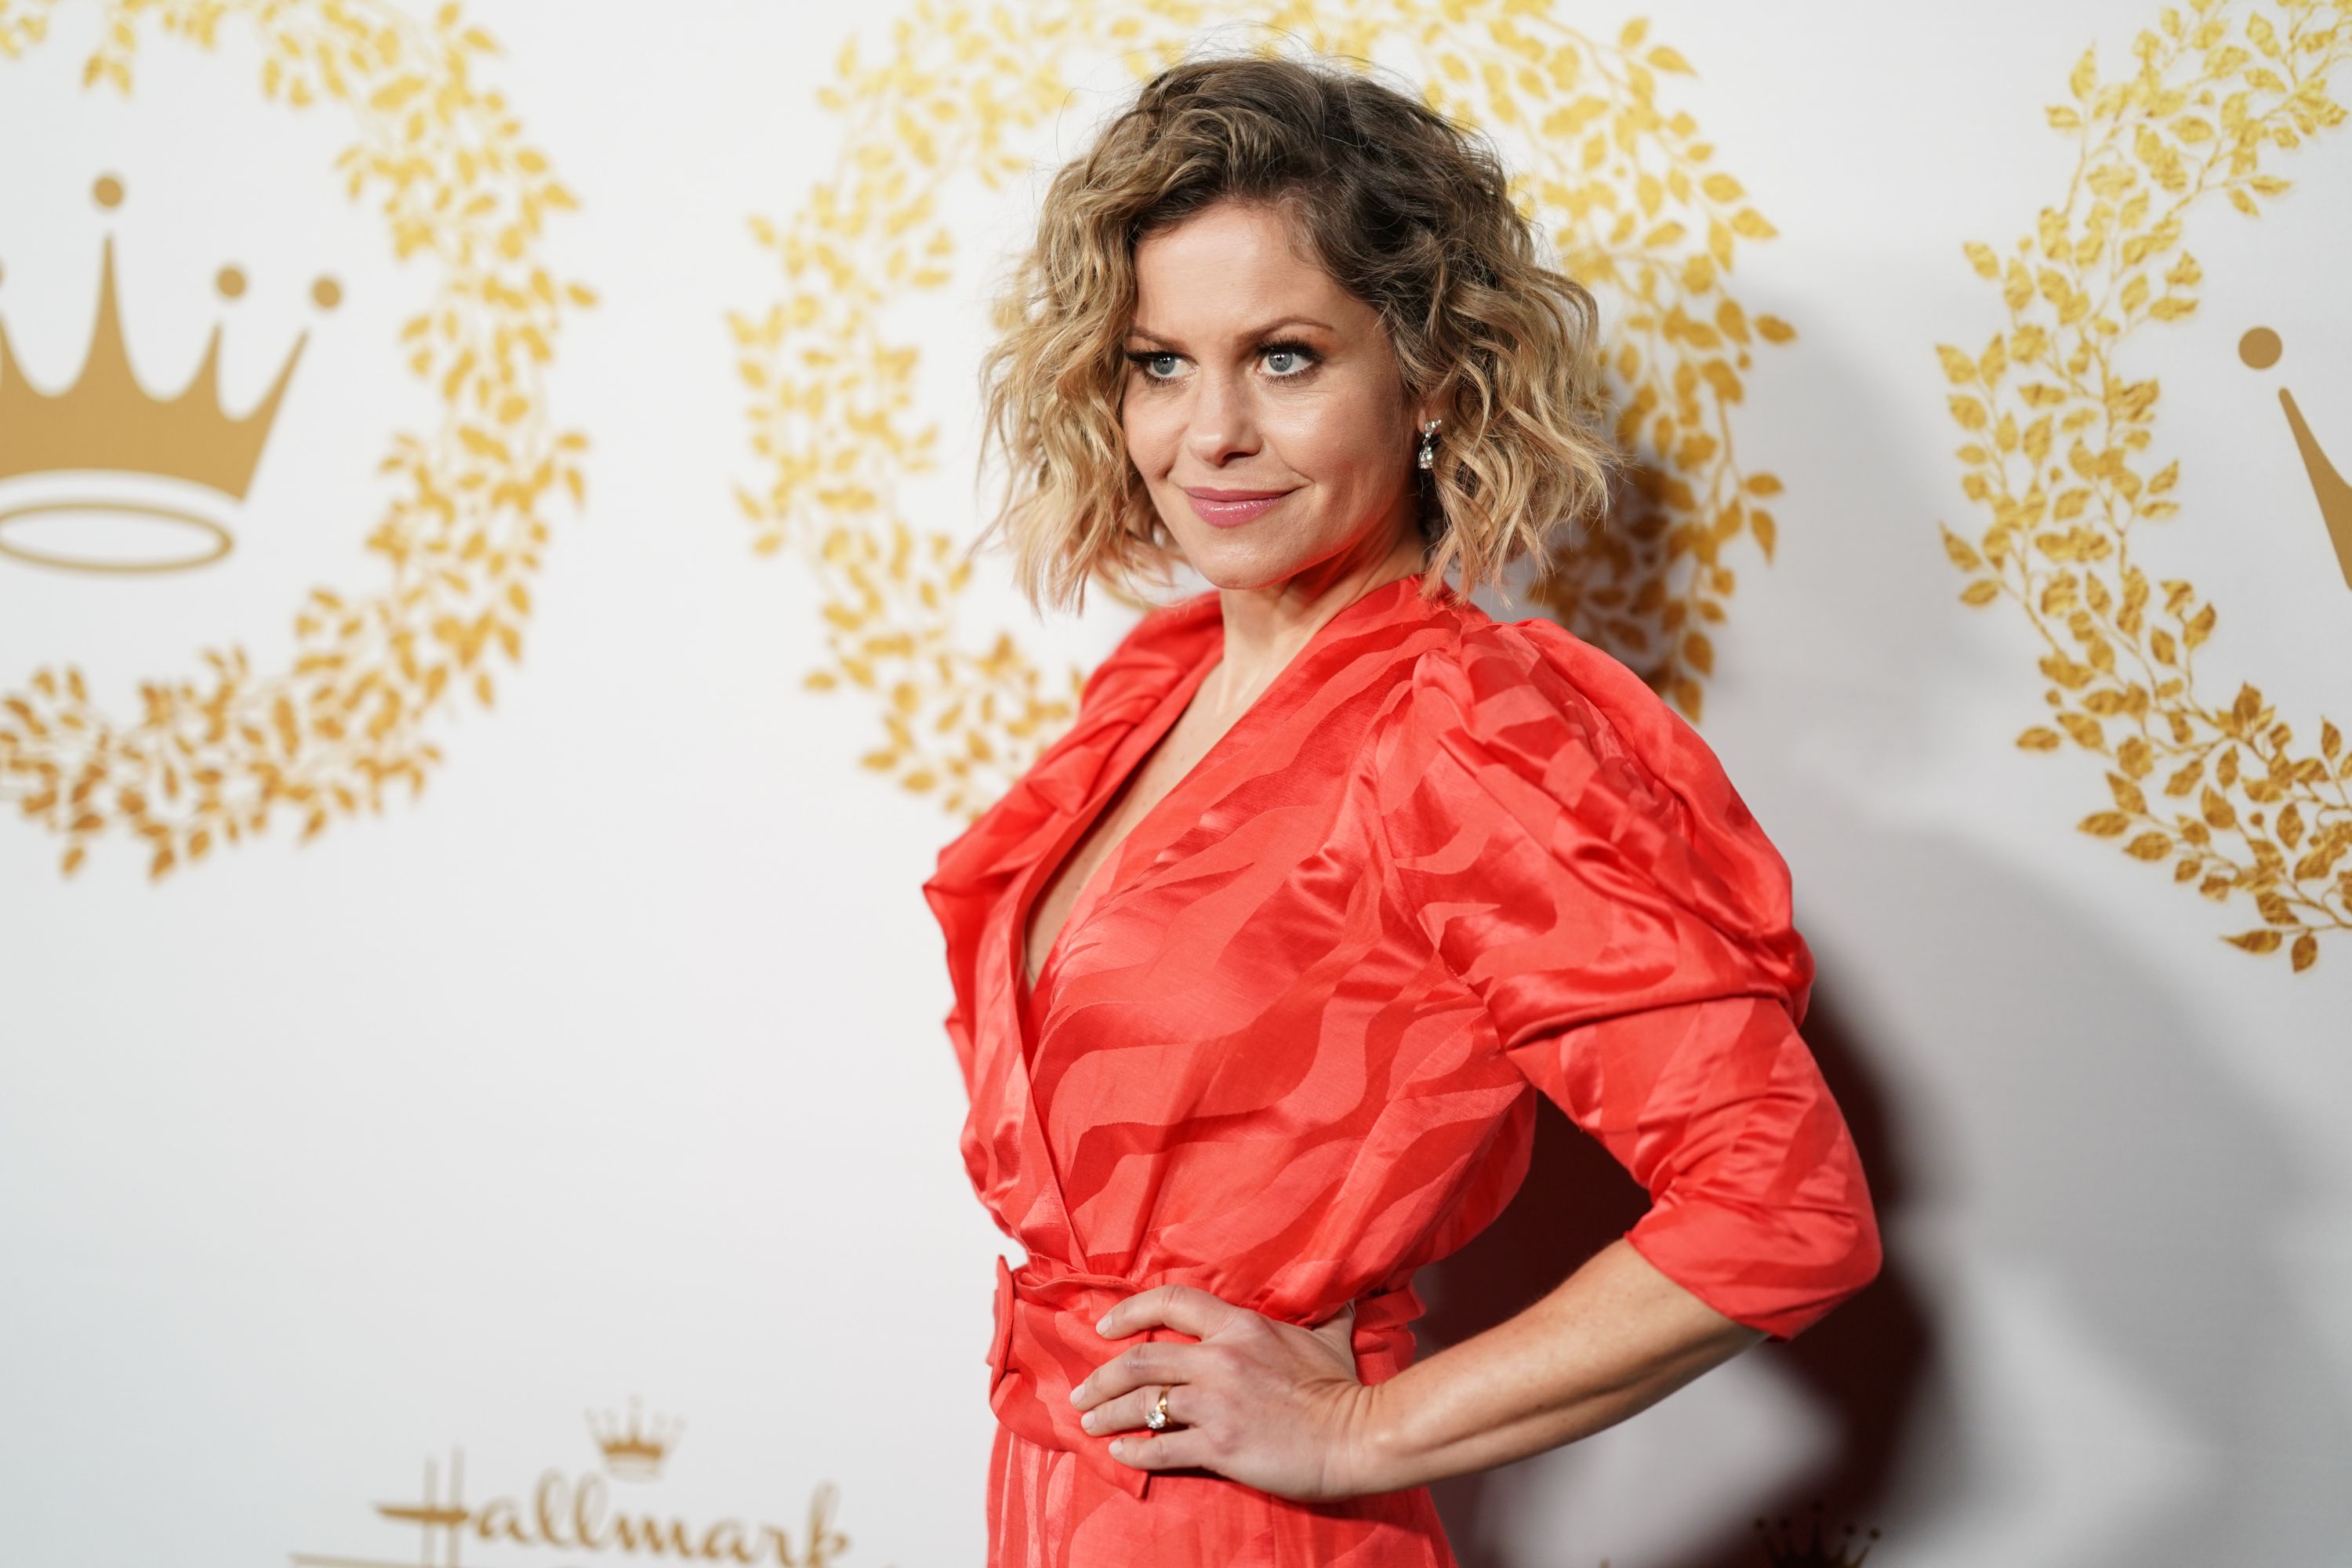 Candace Cameron Bure at the Hallmark Channel And Hallmark Movies And Mysteries 2019 Winter TCA Tour in Pasadena, California | Source: Getty Images